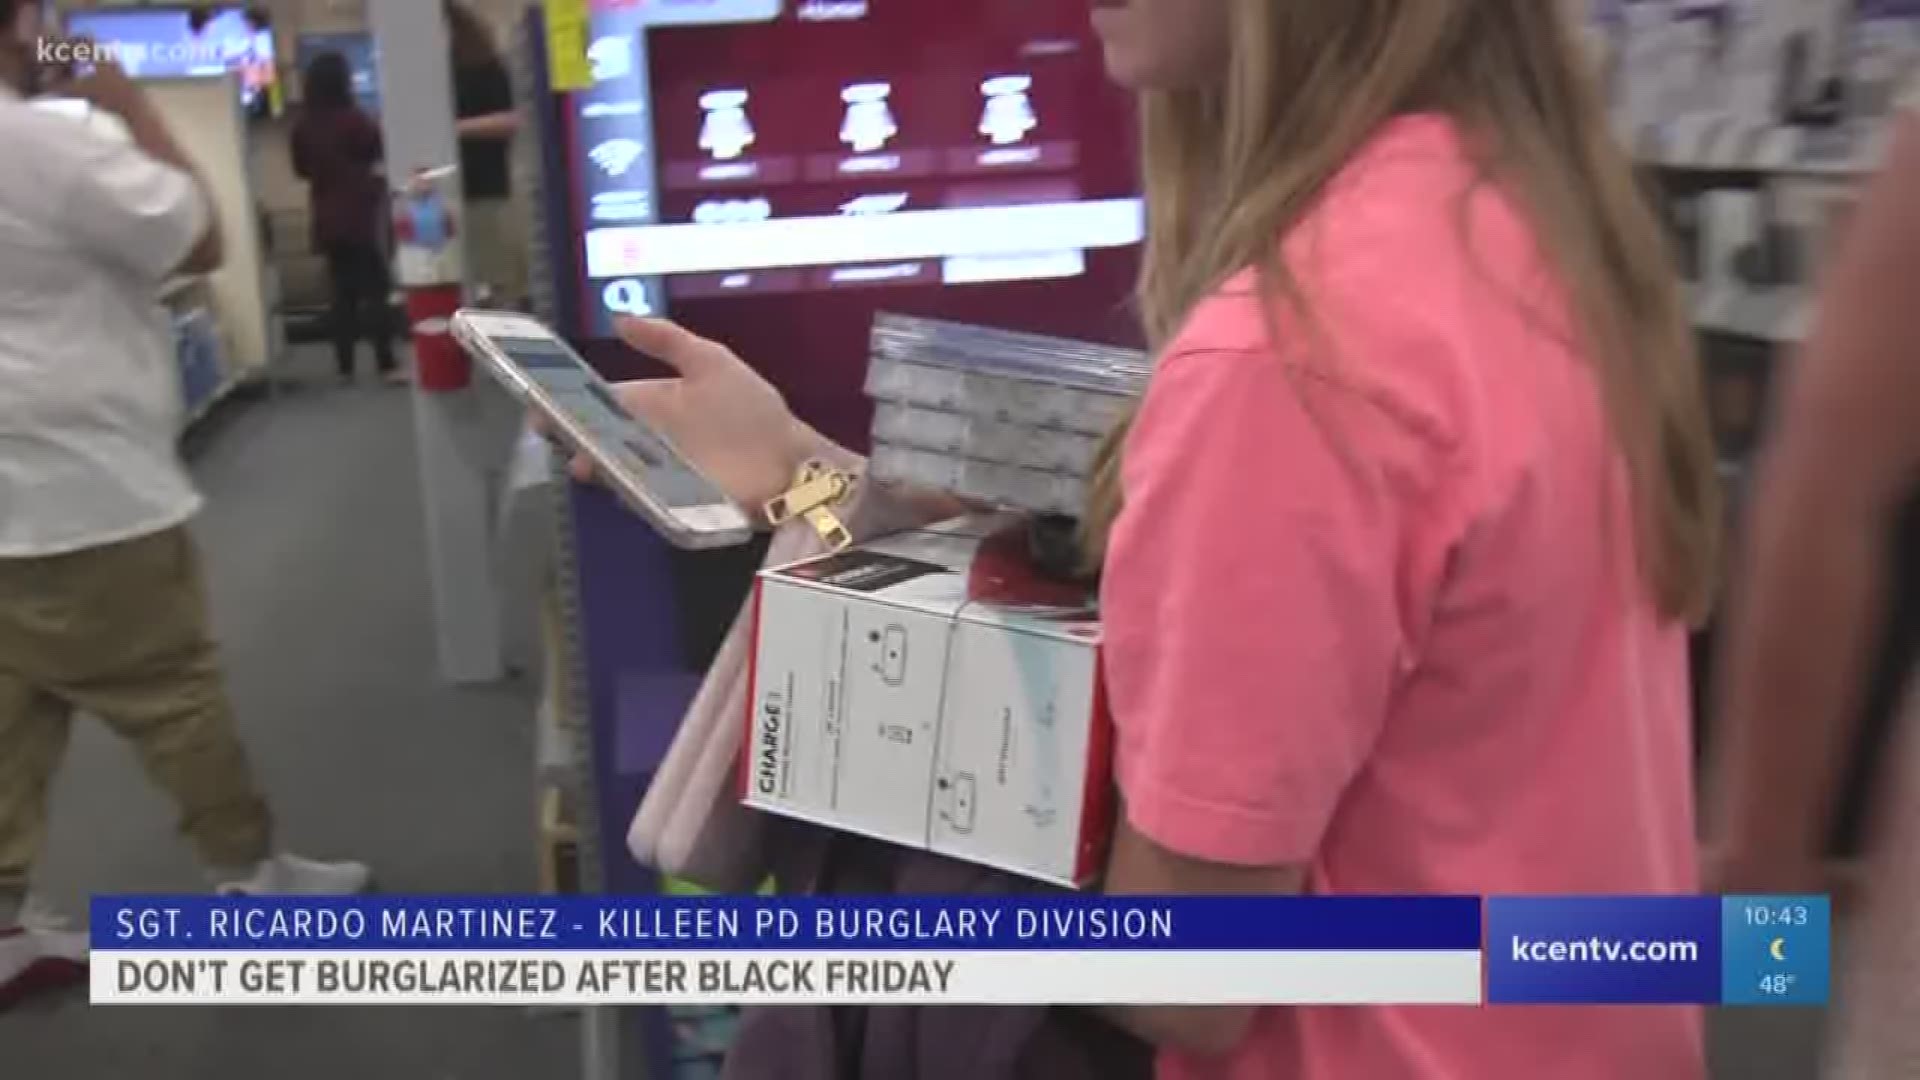 Andrew Moore gives tips on making sure your Black Friday bargains are safe.